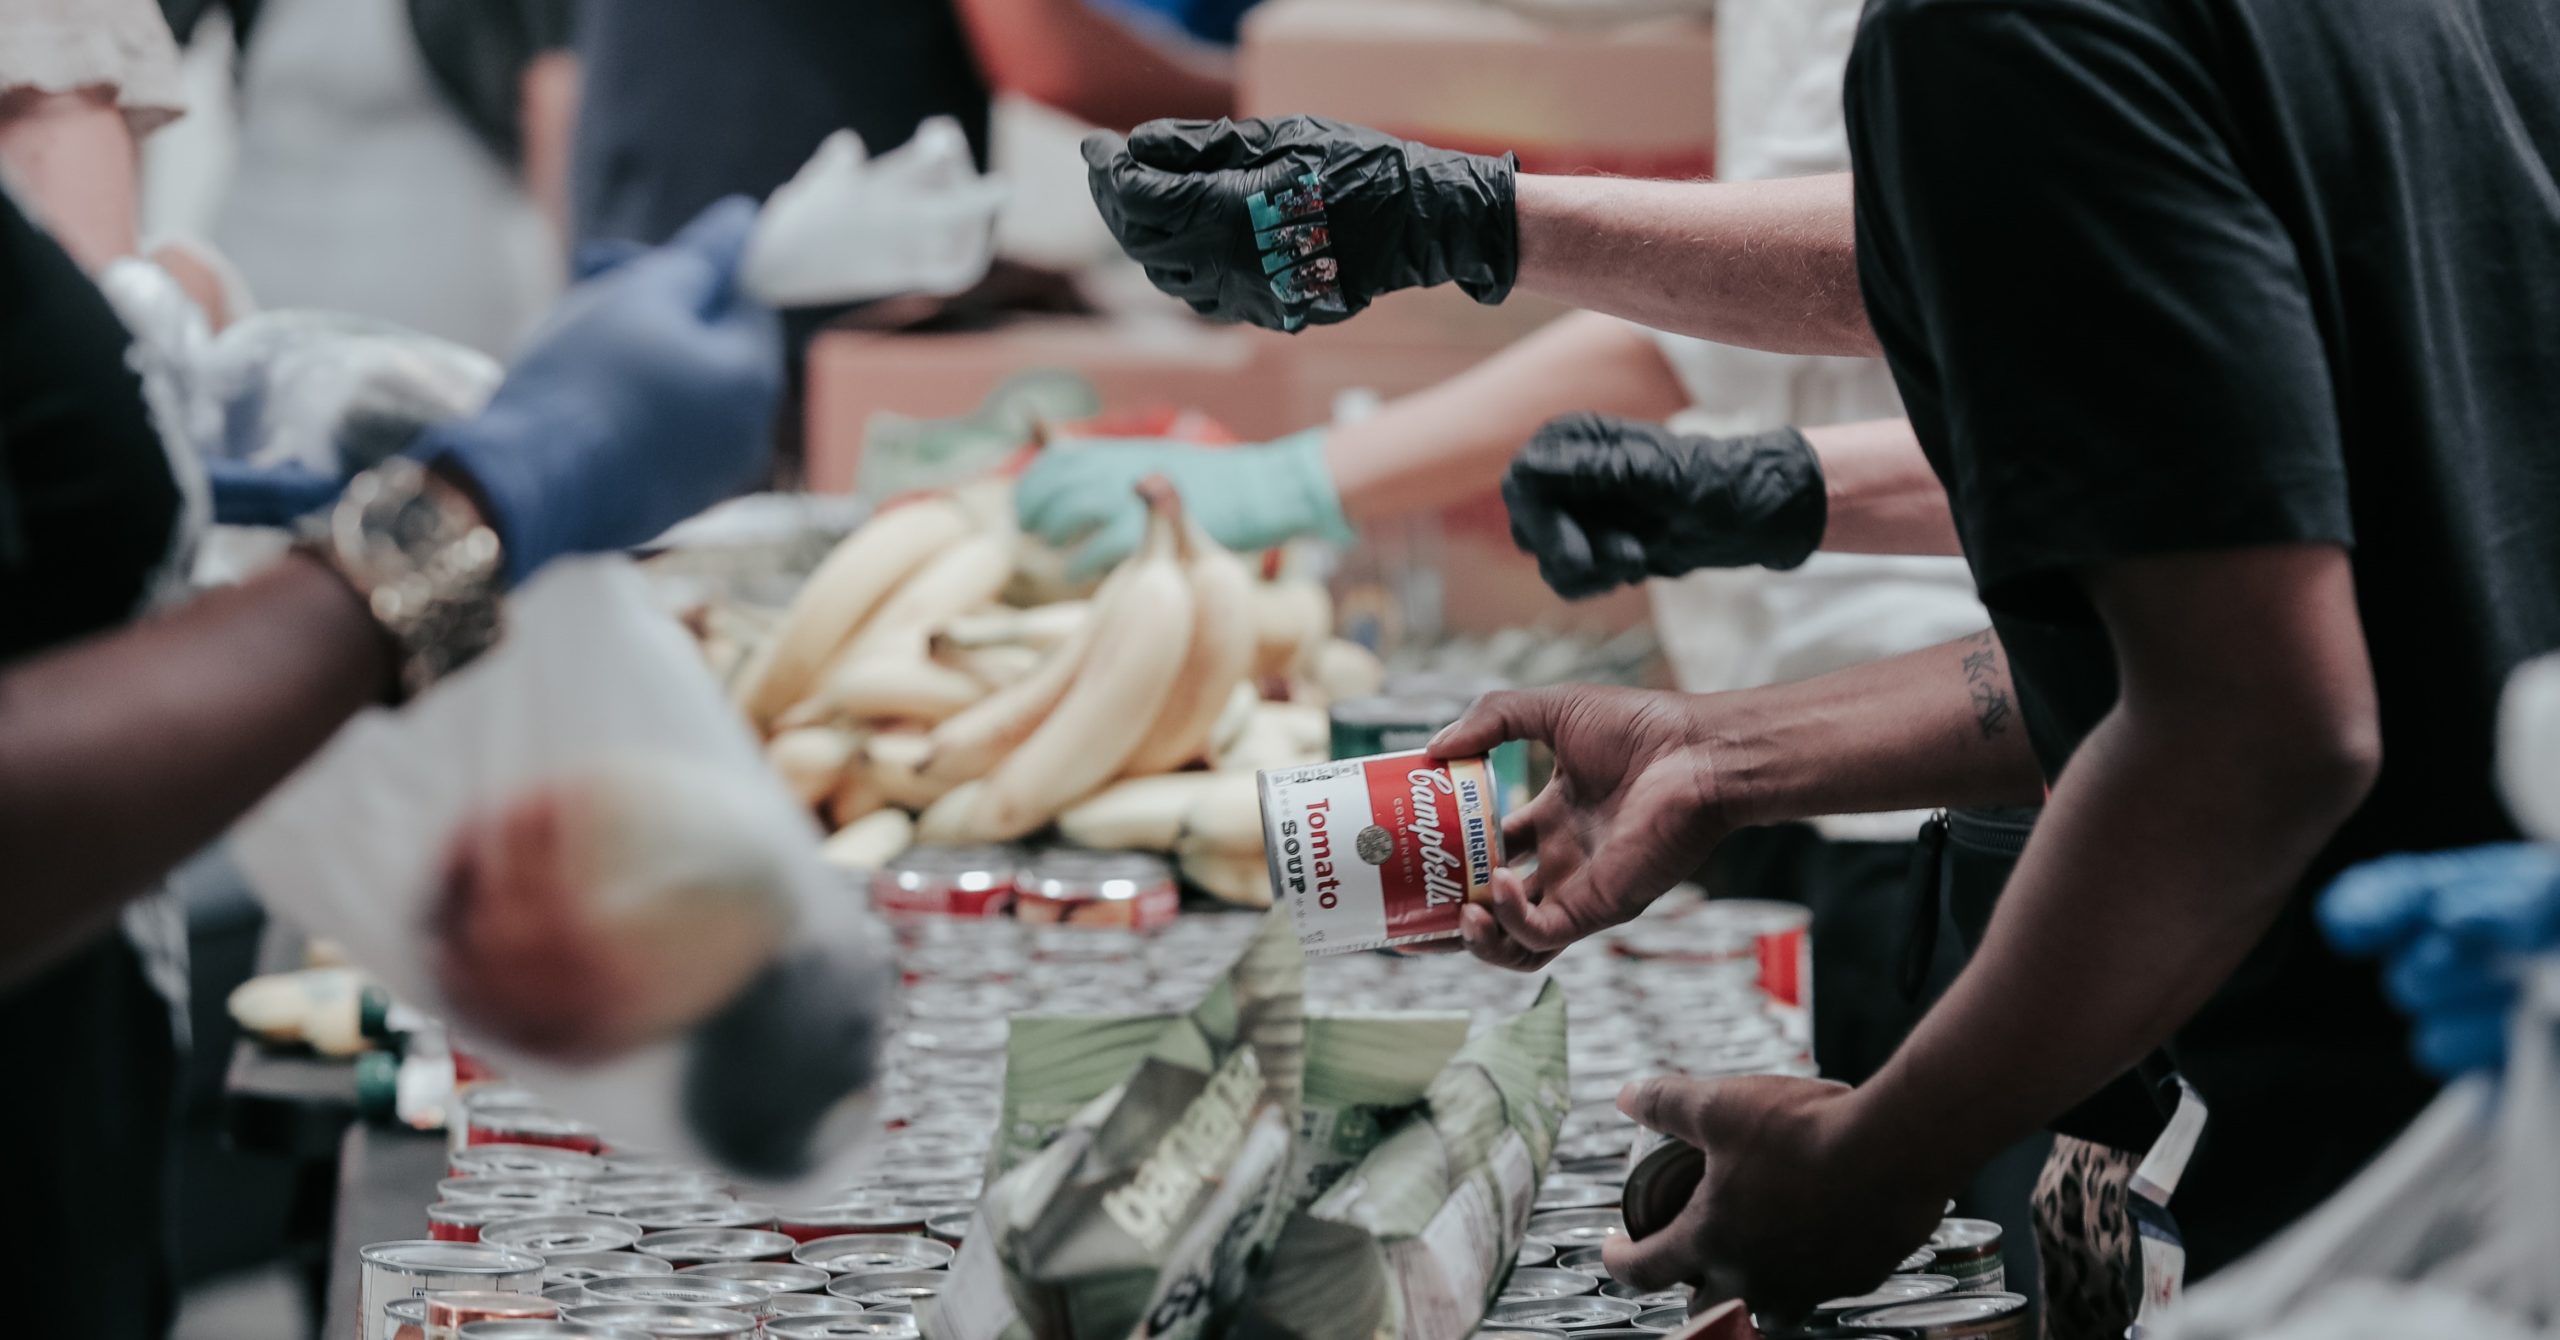 People sorting canned food for donations at a food bank